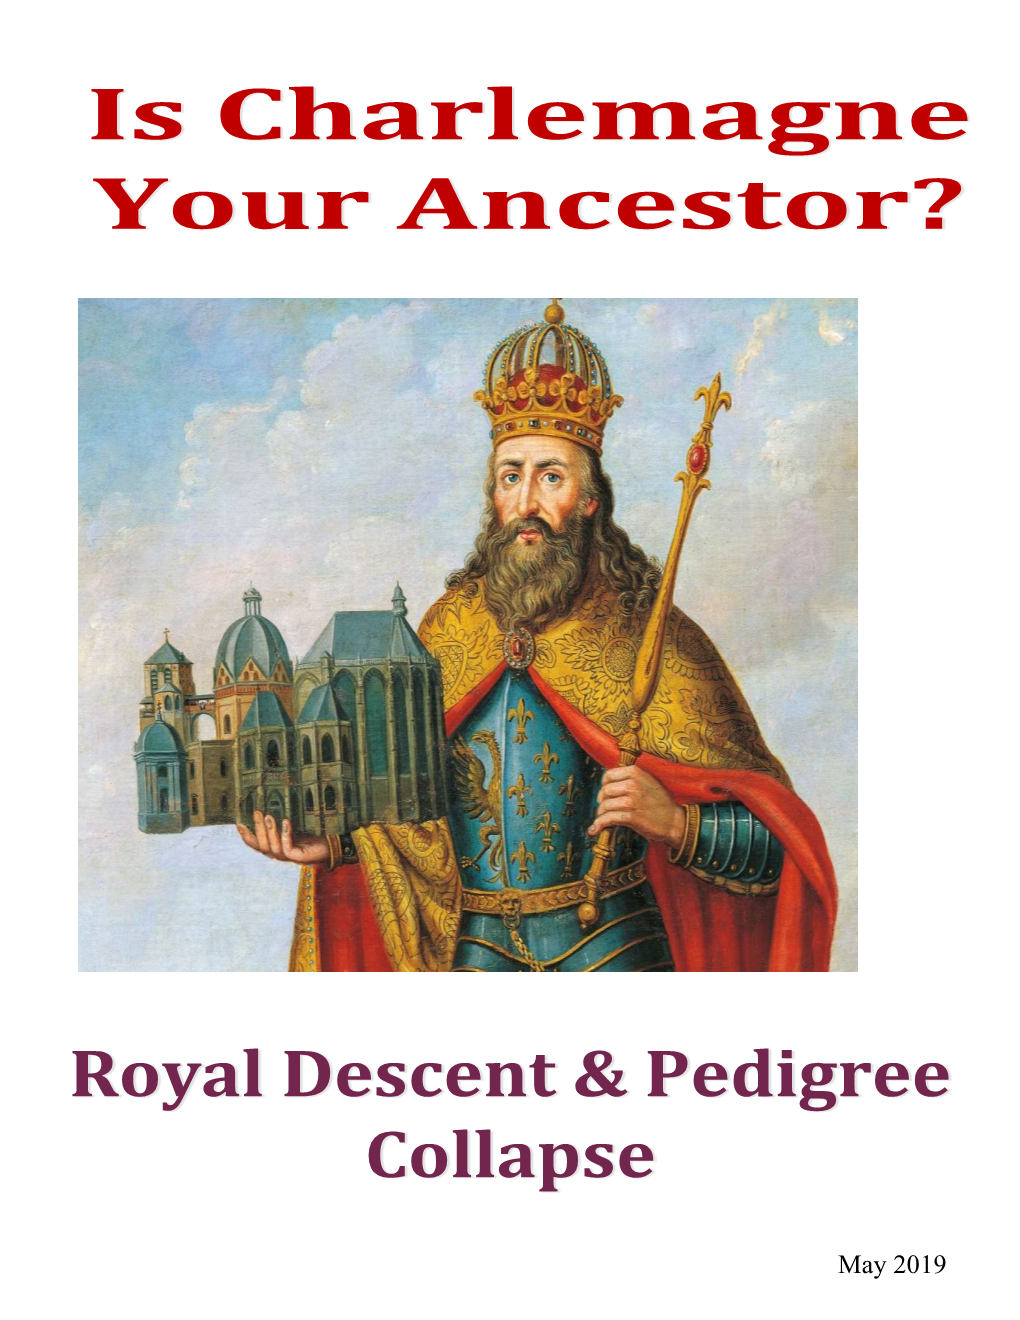 May 2019 Is Charlemagne Your Ancestor? (Royal Descent & Pedigree Collapse)